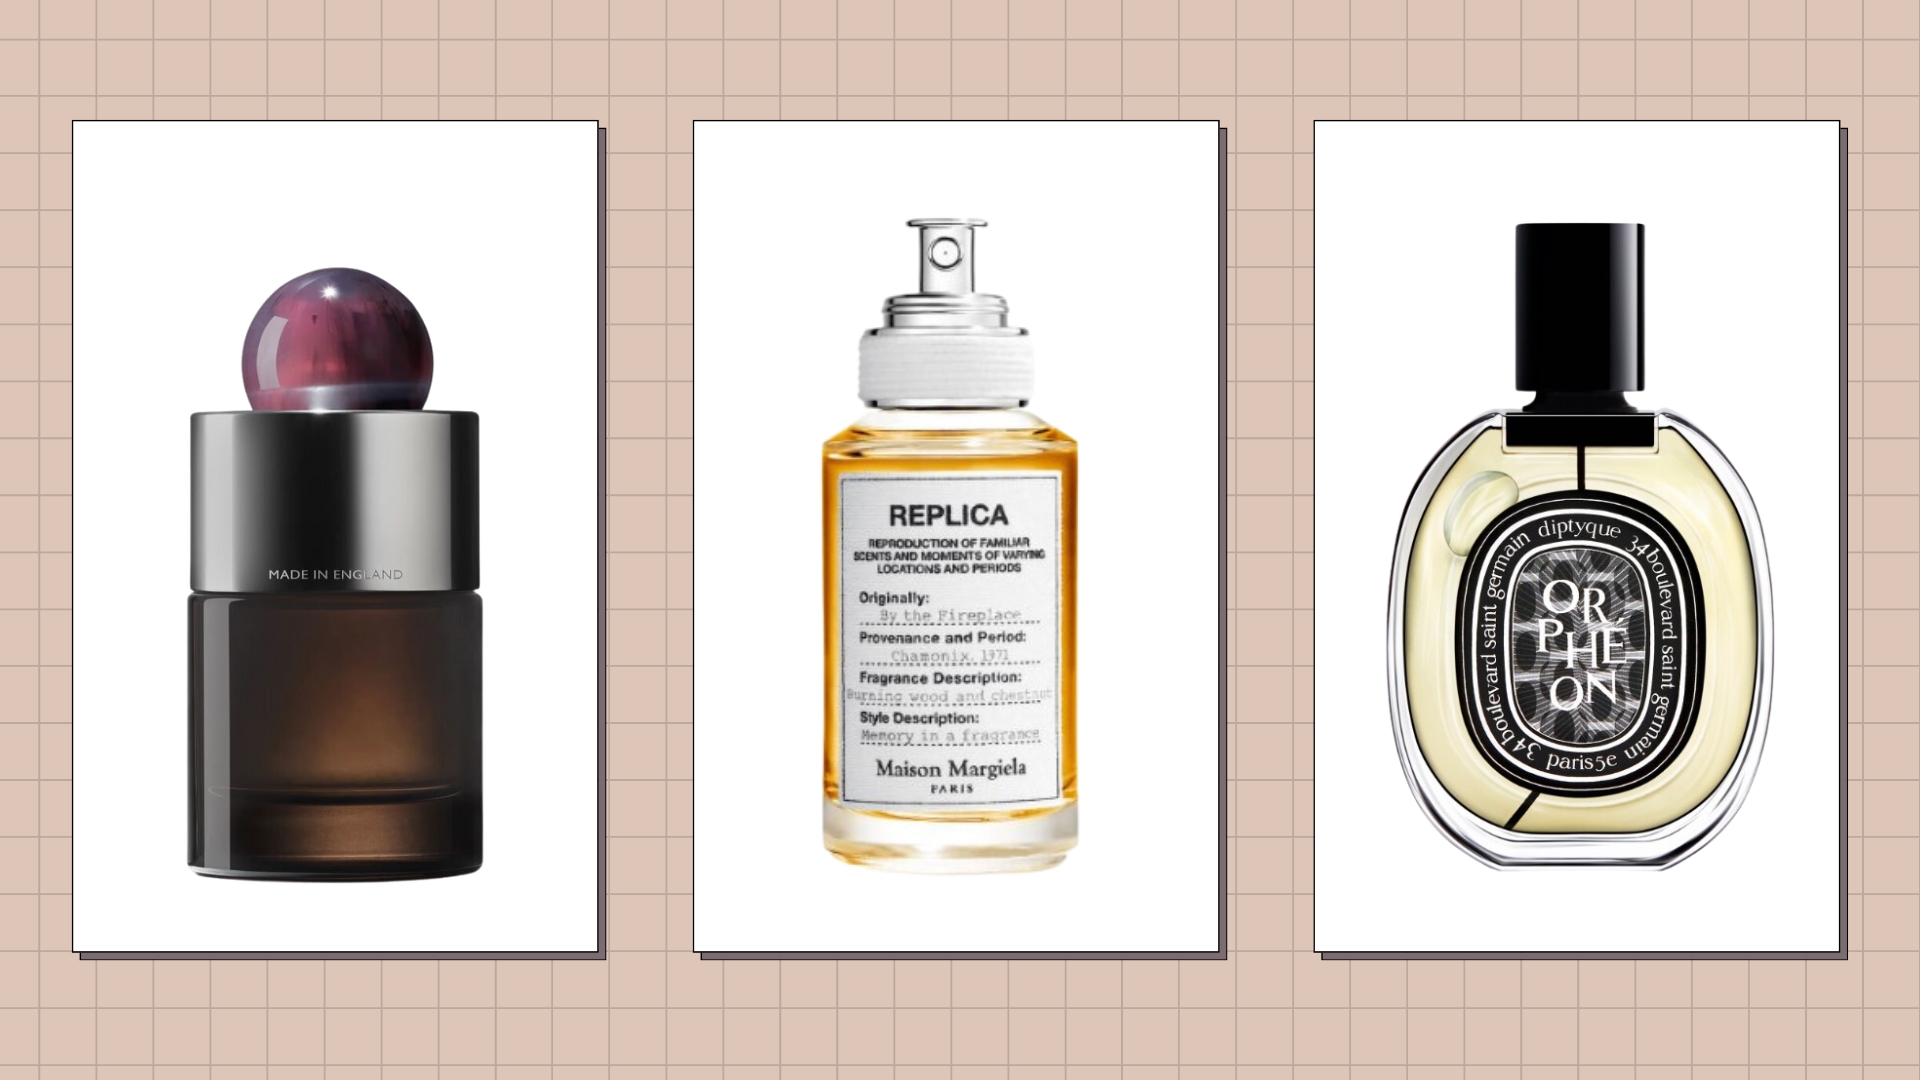 Men's Winter Fragrances: The Best Warm & Spicy Fragrances For Cold